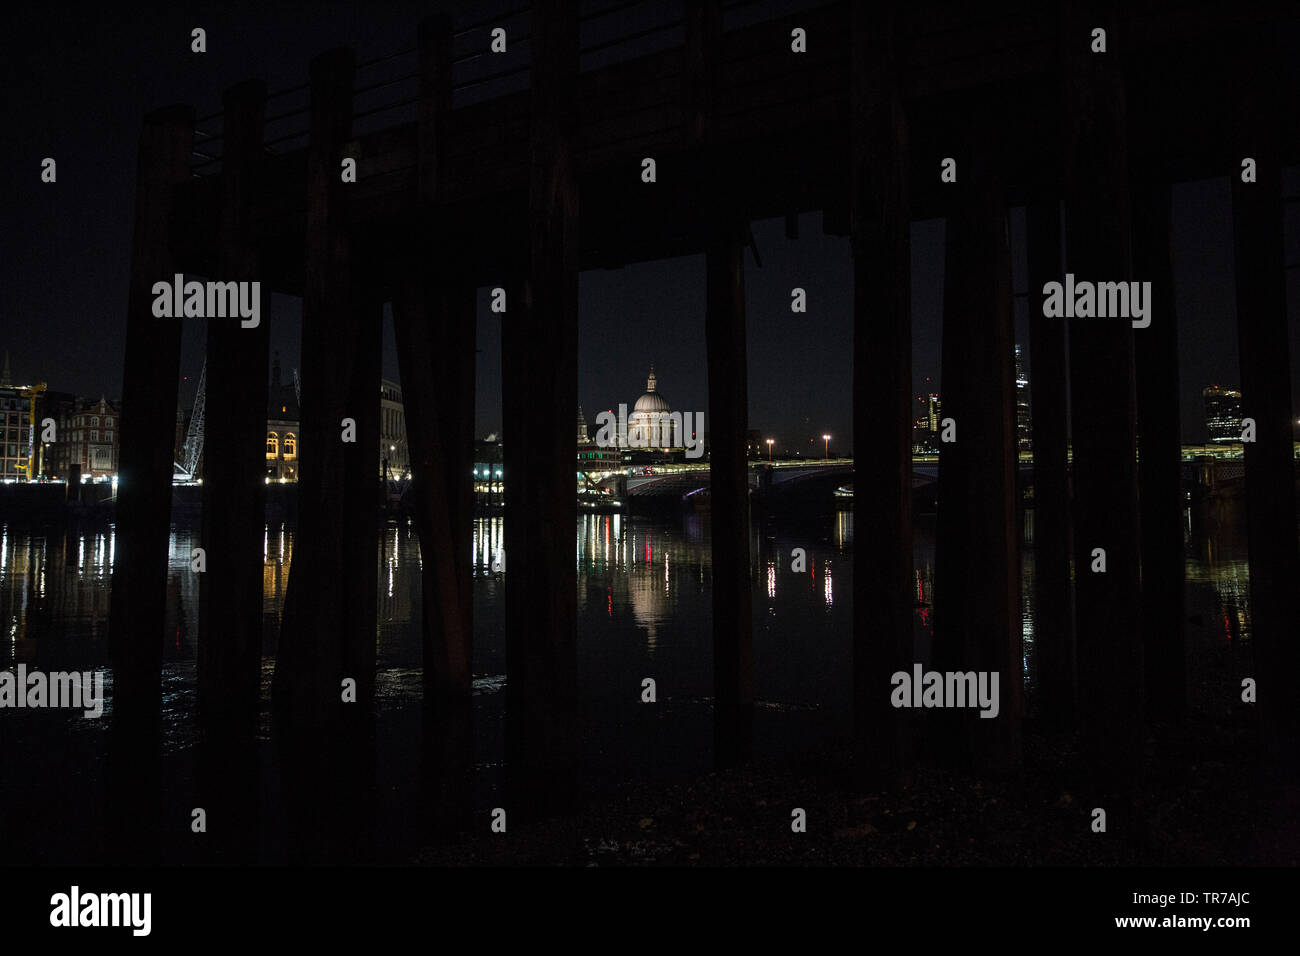 St Paul's Cathedral at dawn, photographed from the banks of the River Thames under an old victorian wooden pier, London, England, UK Stock Photo